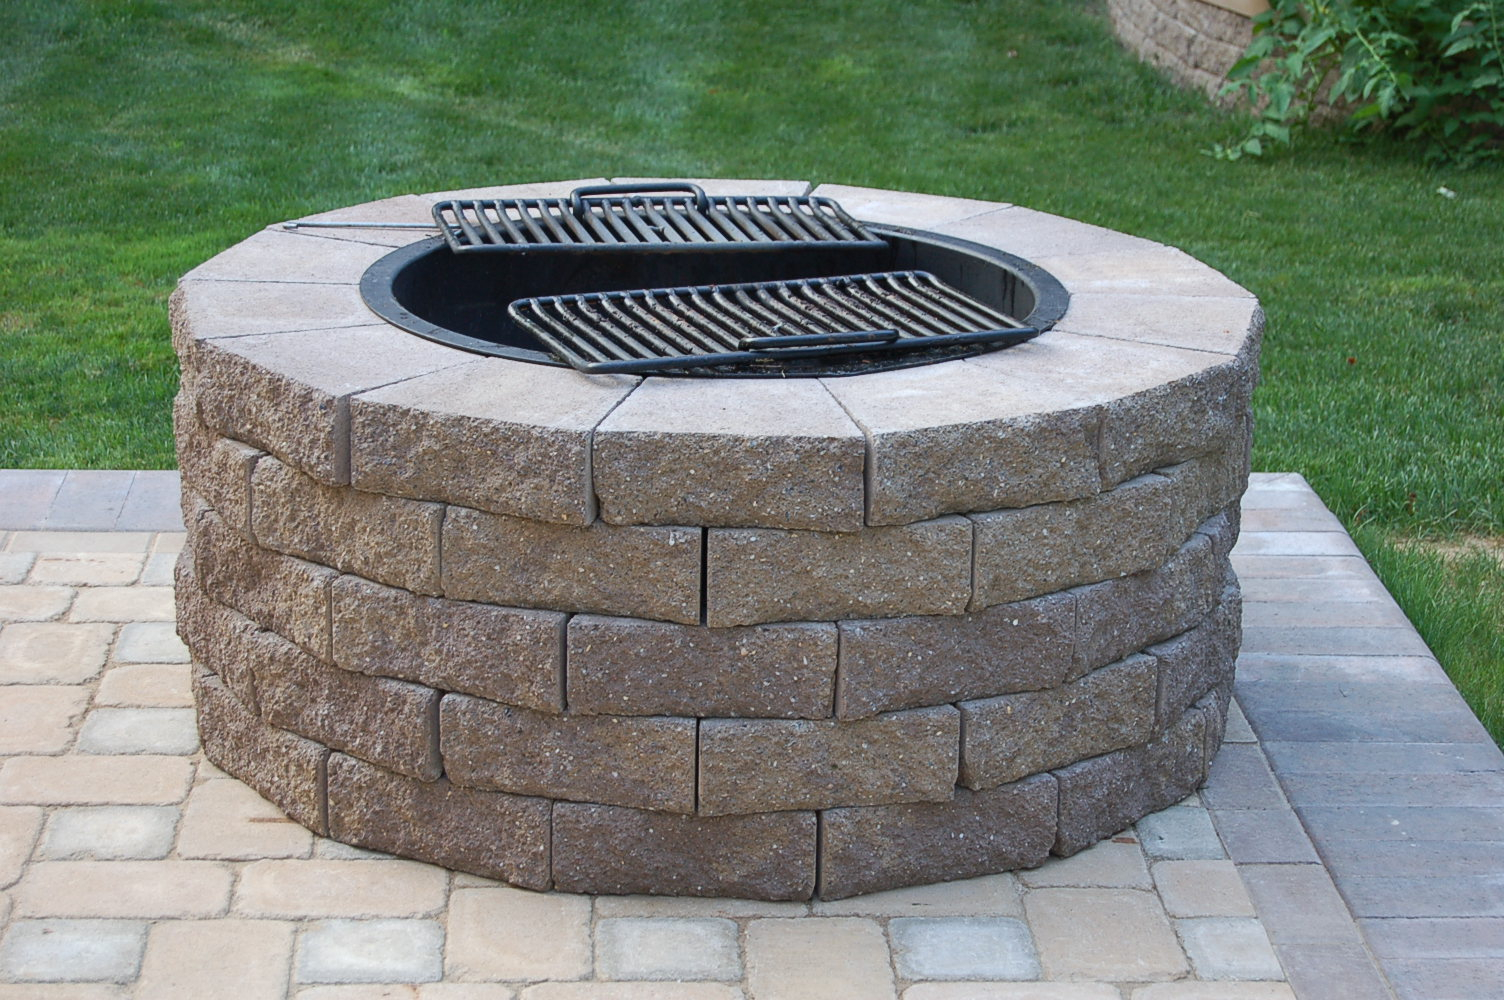 Fire Pit Cooking Grate Fireplace Design Ideas throughout sizing 1504 X 1000